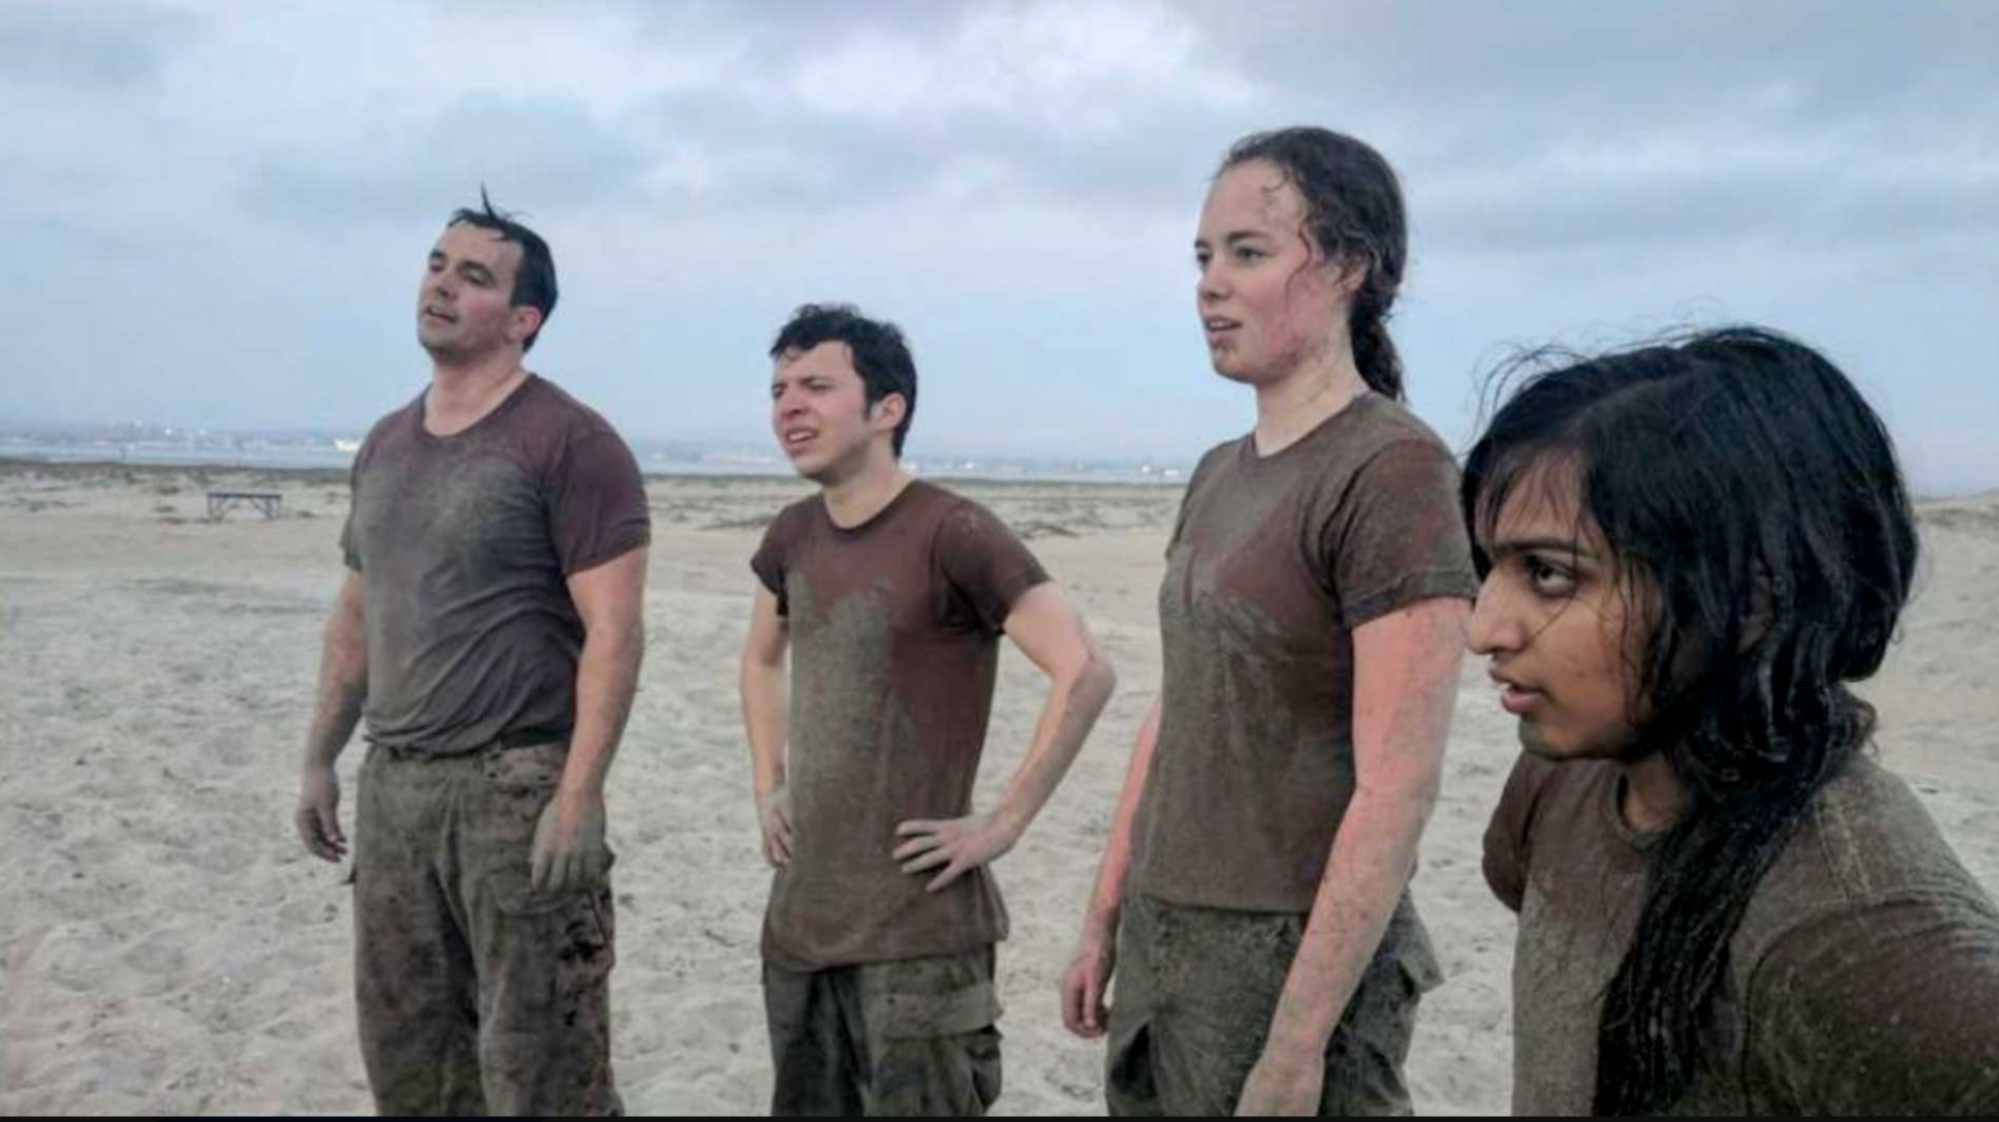 Students from Steve Blank and Steve Weinstein’s class at Navy SEAL Basic Underwater Demolition training